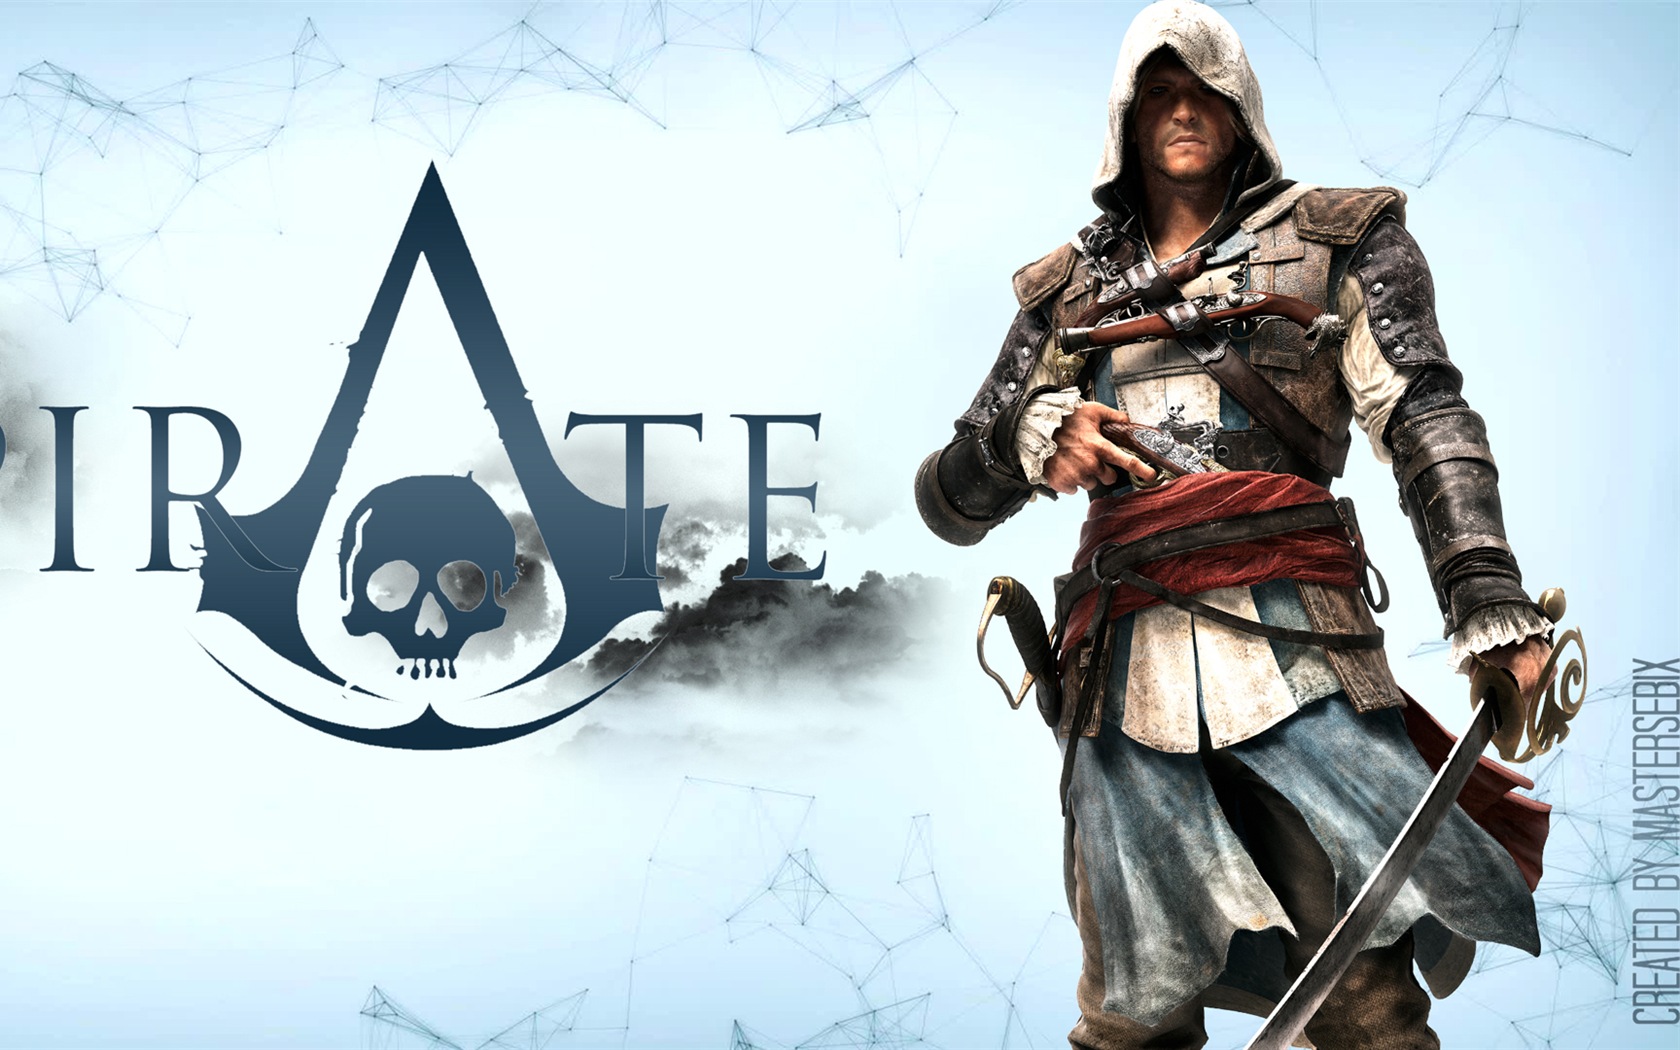 Creed IV Assassin: Black Flag HD wallpapers #18 - 1680x1050